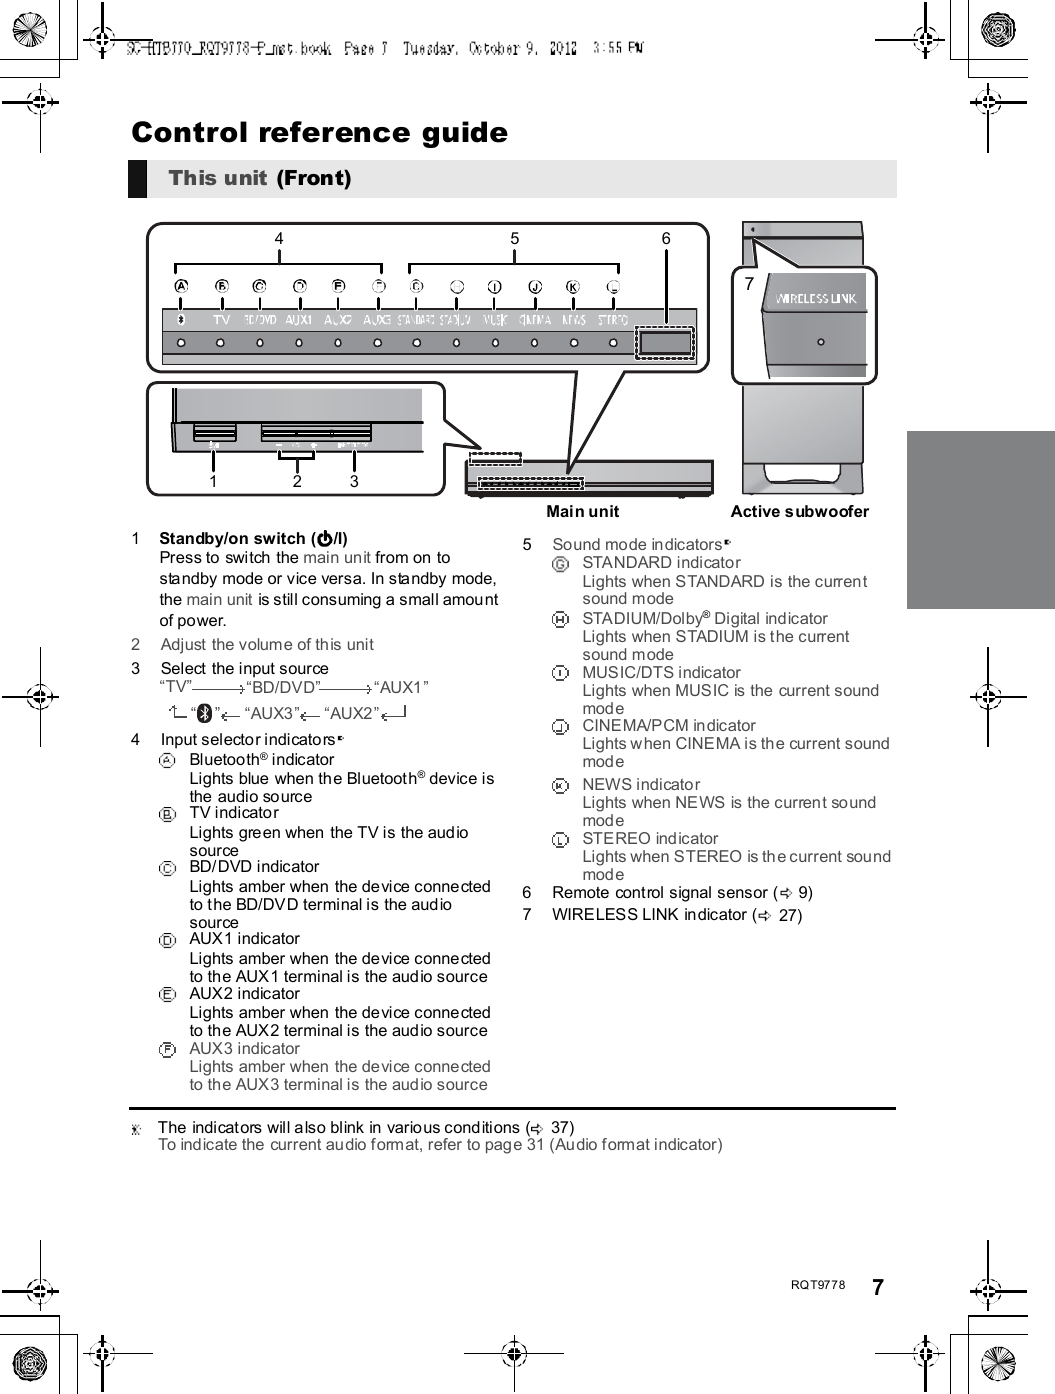 RQT9778 7Control reference guide1Standby/on switch ( /I)Press to switch the main unit from on tostandby mode or vice versa. In standby mode,the main unit  is still consuming a small amountof power.2 Adjust the volume of this unit3 Select the input sourceTVBD/DVDAUX1 AUX3 AUX24 Input selector indicatorsBluetooth® indicatorLights blue when the Bluetooth® device isthe audio sourceTV indicatorLights green when the TV is the audiosourceBD/DVD indicatorLights amber when the device connectedto the BD/DVD terminal is the audiosourceAUX1 indicatorLights amber when the device connectedto the AUX1 terminal is the audio sourceAUX2 indicatorLights amber when the device connectedto the AUX2 terminal is the audio sourceAUX3 indicatorLights amber when the device connectedto the AUX3 terminal is the audio source5Sound mode indicatorsSTANDARD indicatorLights when STANDARD is the currentsound modeSTADIUM/Dolby® Digital indicatorLights when STADIUM is the currentsound modeMUSIC/DTS indicatorLights when MUSIC is the current soundmodeCINEMA/PCM indicatorLights when CINEMA is the current soundmodeNEWS indicatorLights when NEWS is the current soundmodeSTEREO indicatorLights when STEREO is the current soundmode6 Remote control signal sensor ( 9)7 WIRELESS LINK indicator ( 27)  The indicators will also blink in various conditions ( 37)To indicate the current audio format, refer to page 31 (Audio format indicator)This unit  (Front)71234 56Main unitActive subwoofer